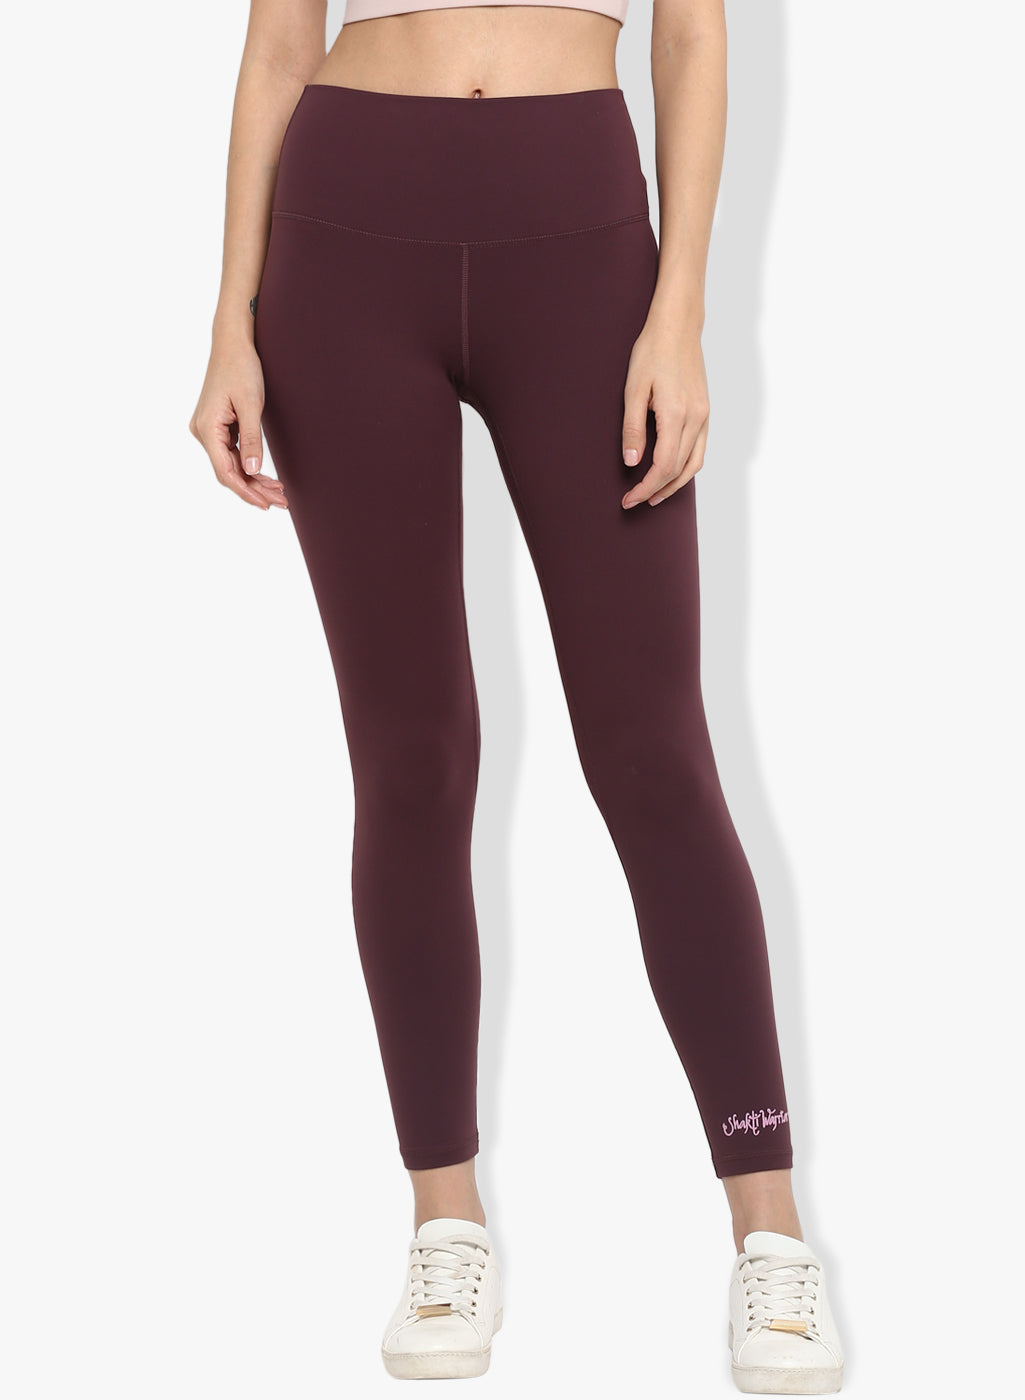 Alo Yoga Warrior Ripped Distressed Red ActiveWorkout Leggings Small - $35 -  From Miriam